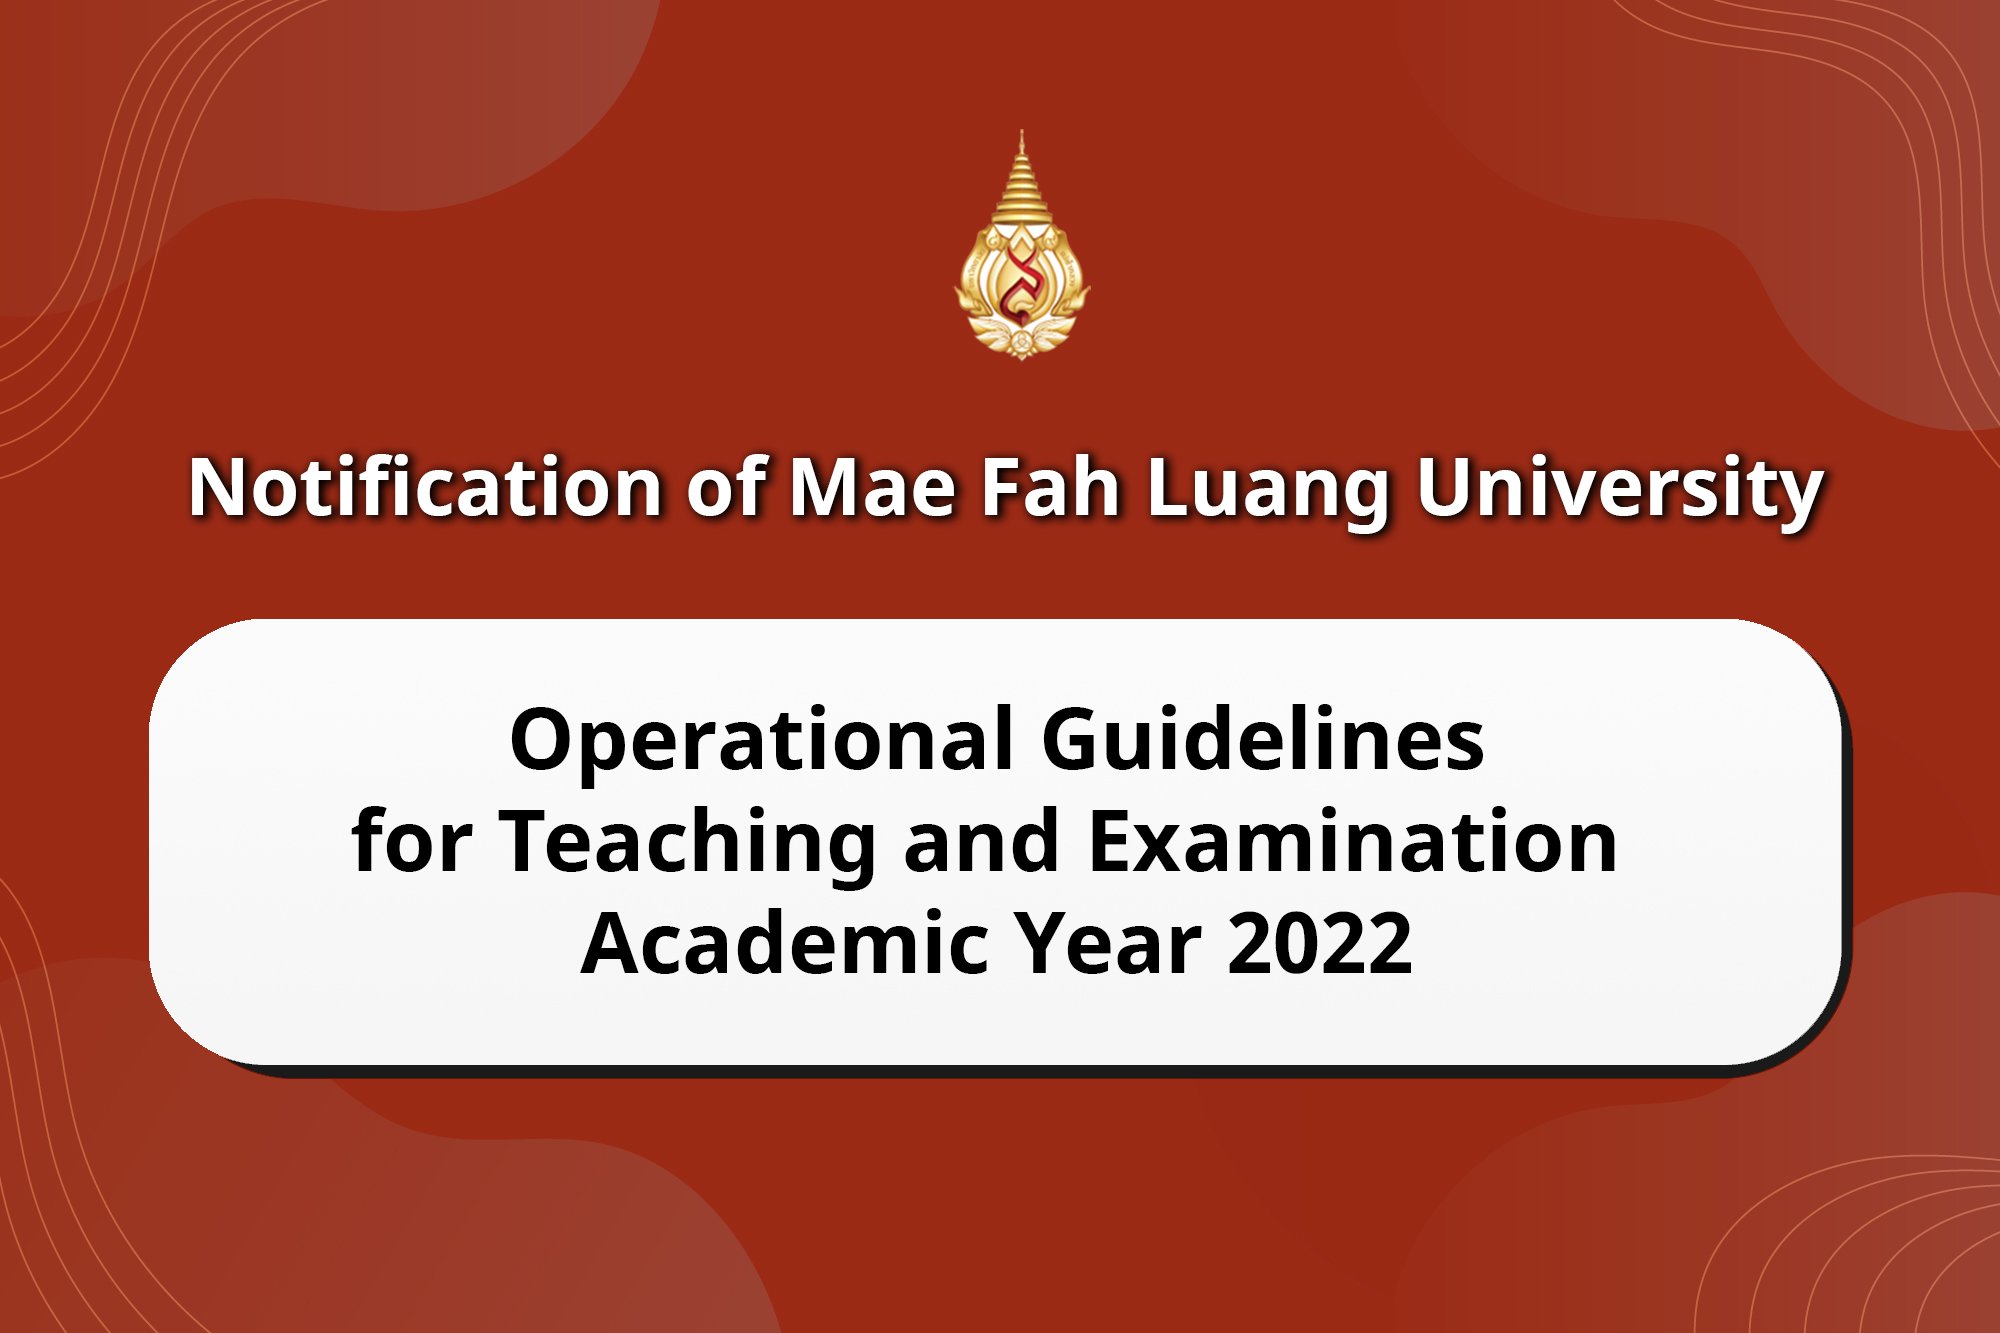 Operational Guidelines for Teaching and Examination, Academic Year 2022